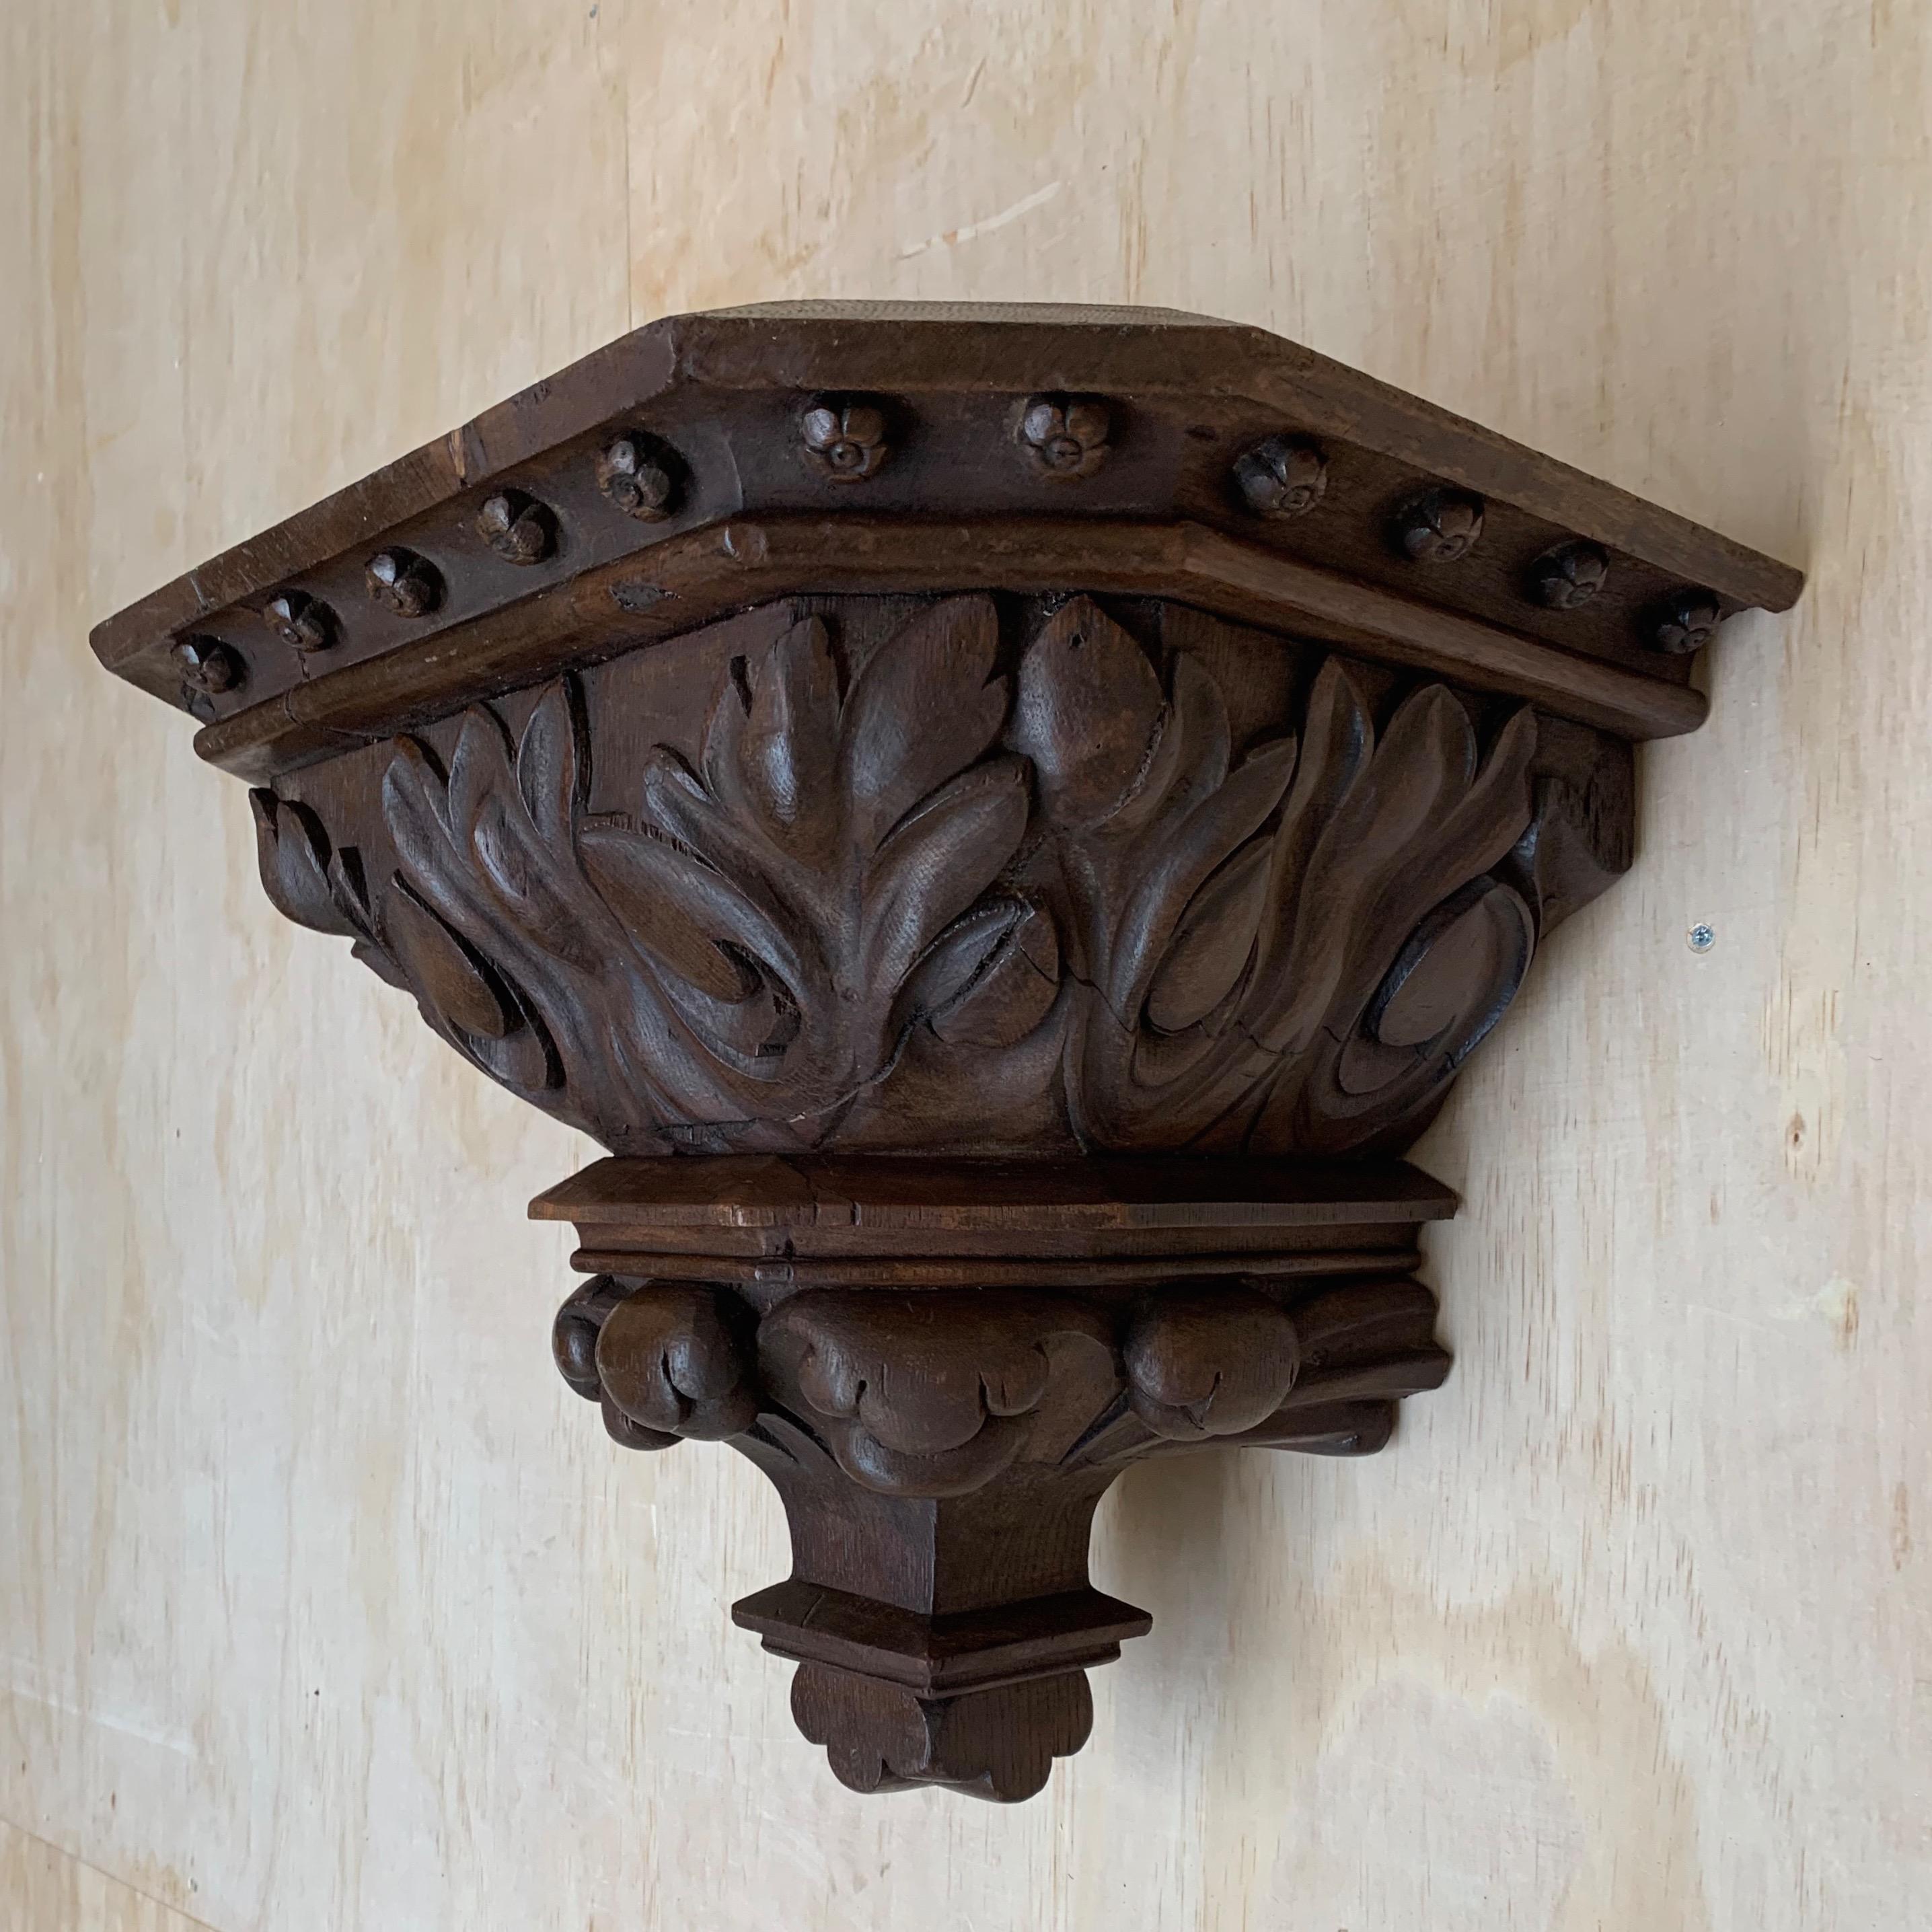 Impressive Large Size and Deeply Carved Oak Gothic Church Wall Bracket / Corbel For Sale 3